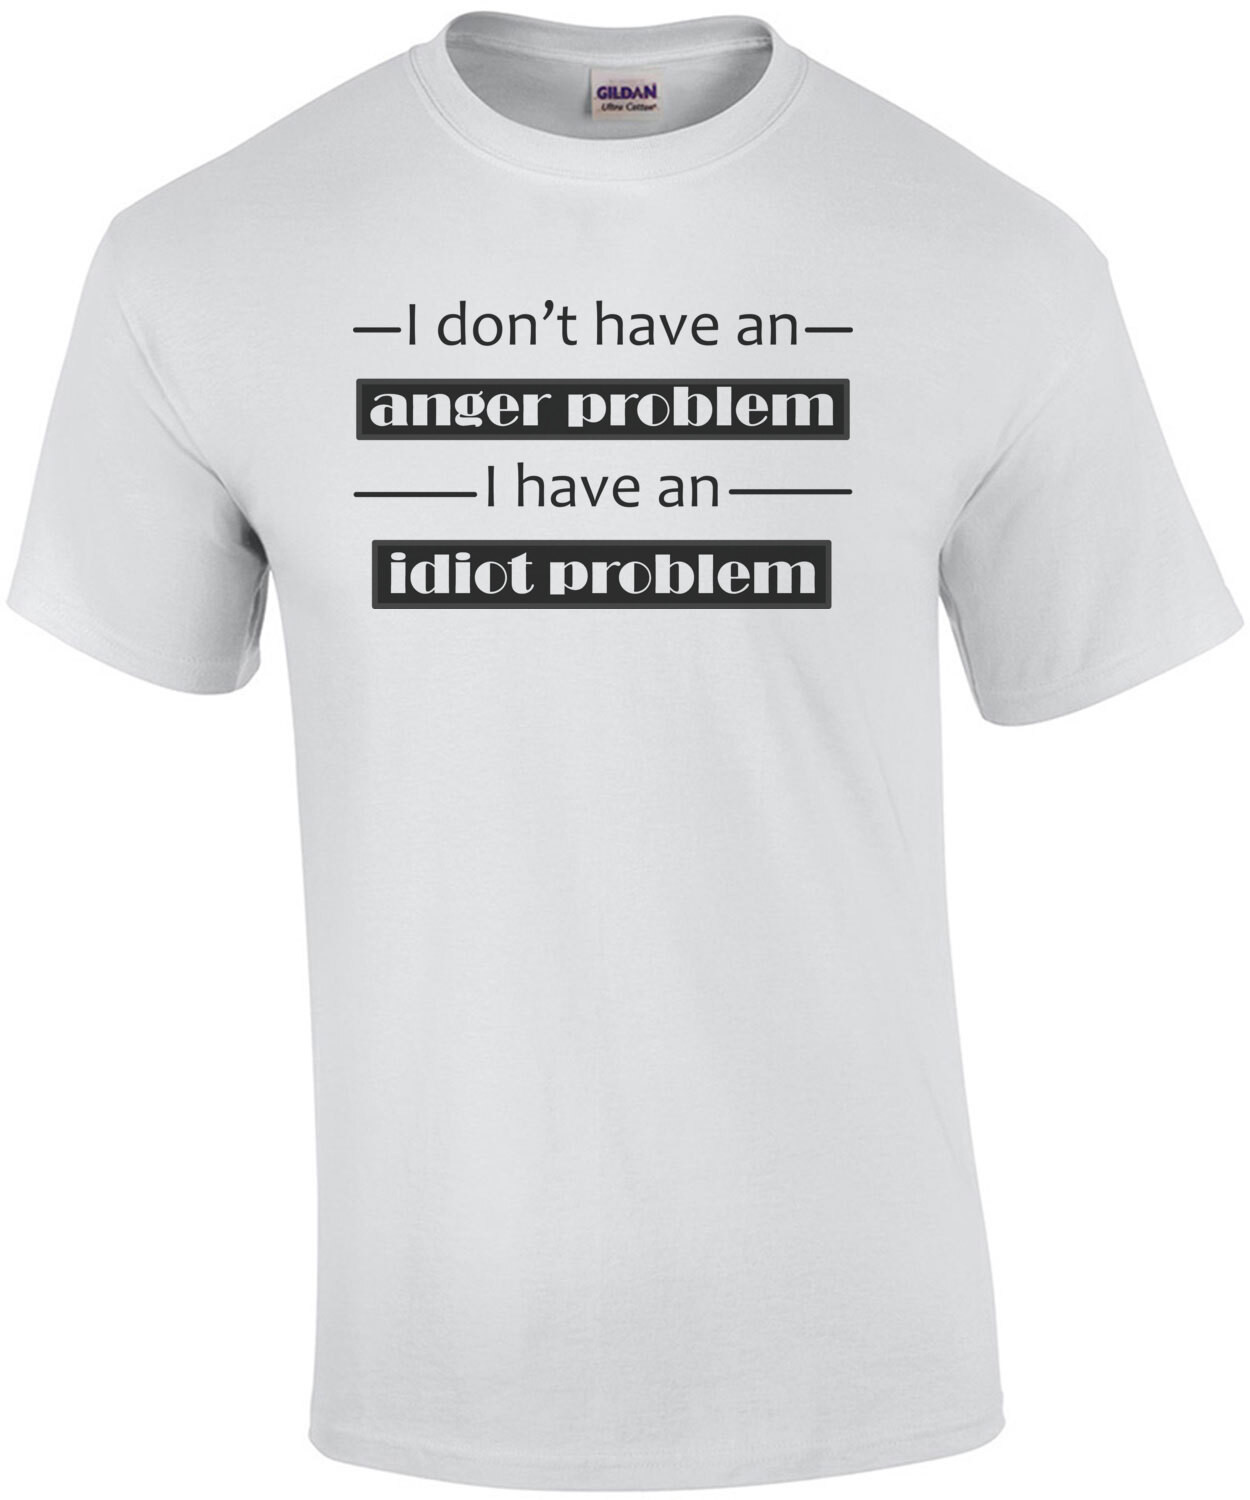 I dont have an anger problem, I have an idiot problem T-Shirt